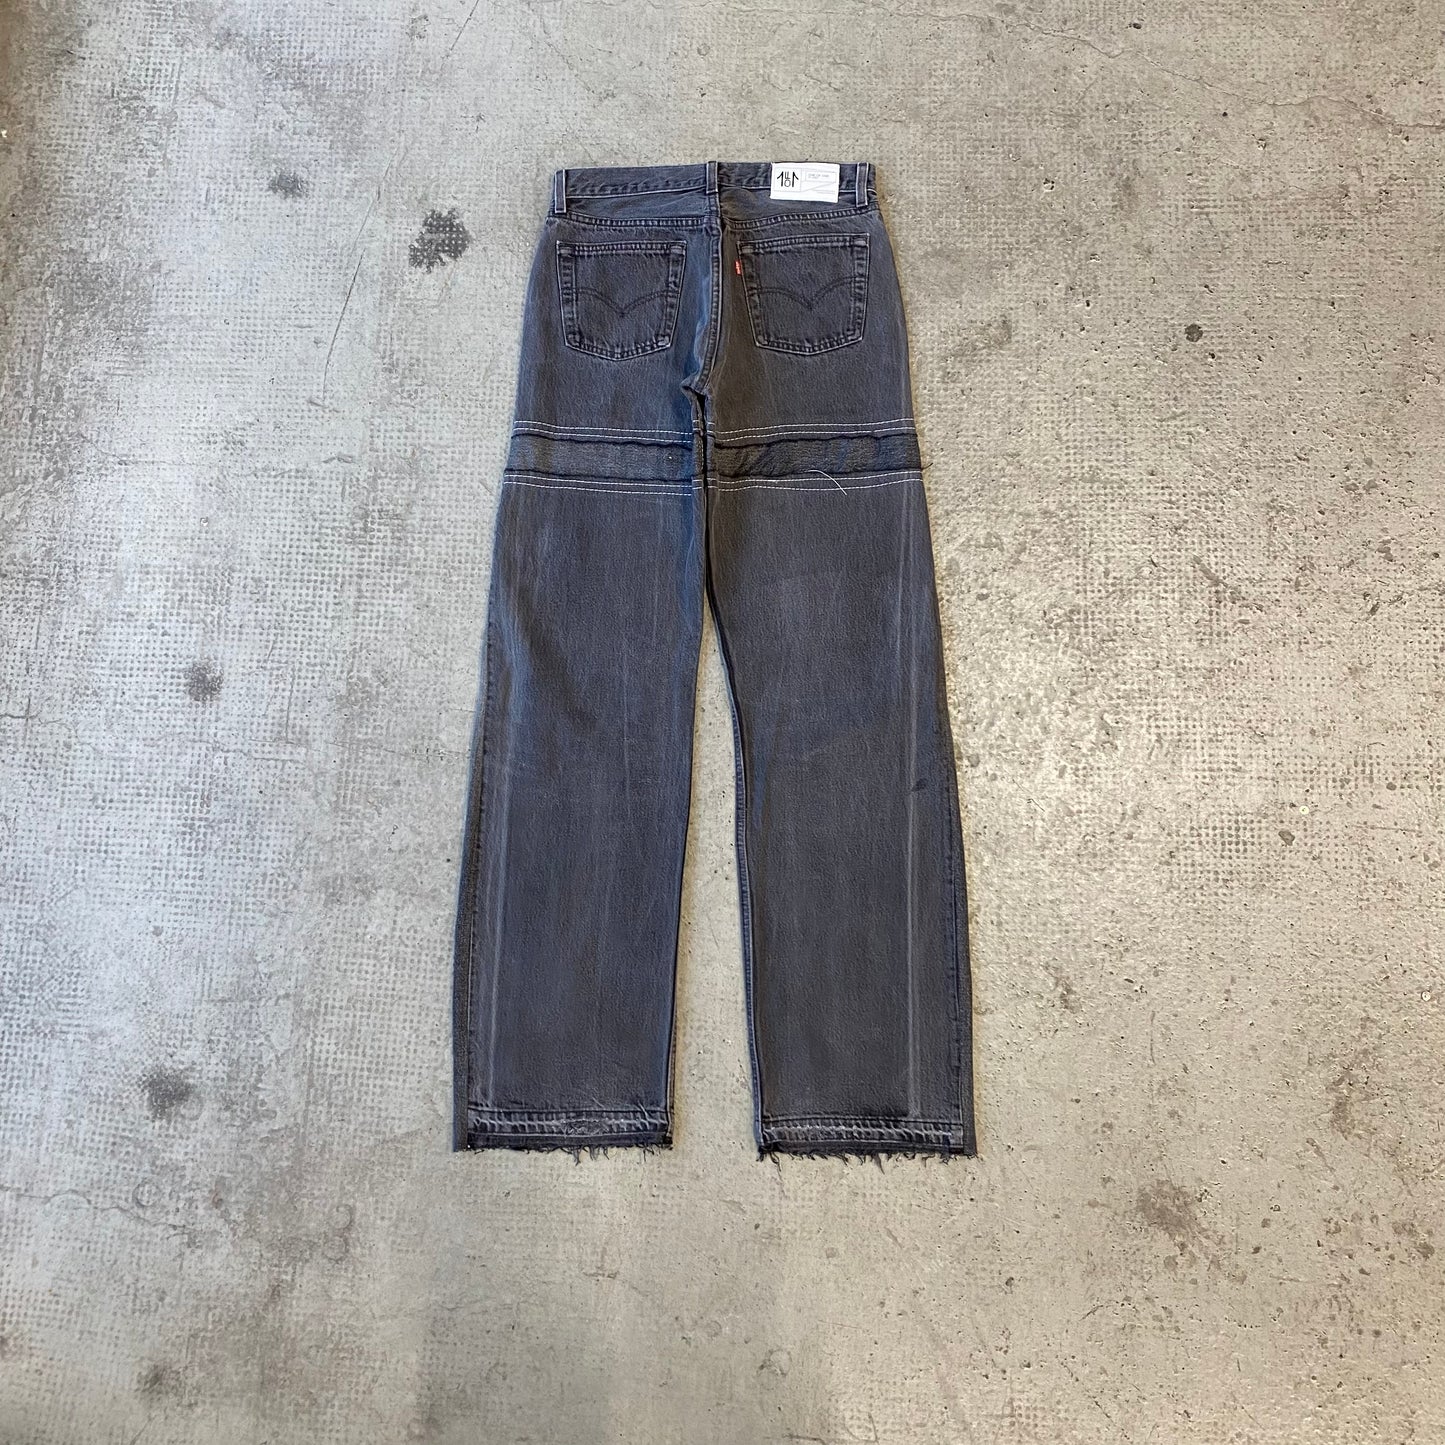 LEVI'S EXAGGERATED ASH GREY